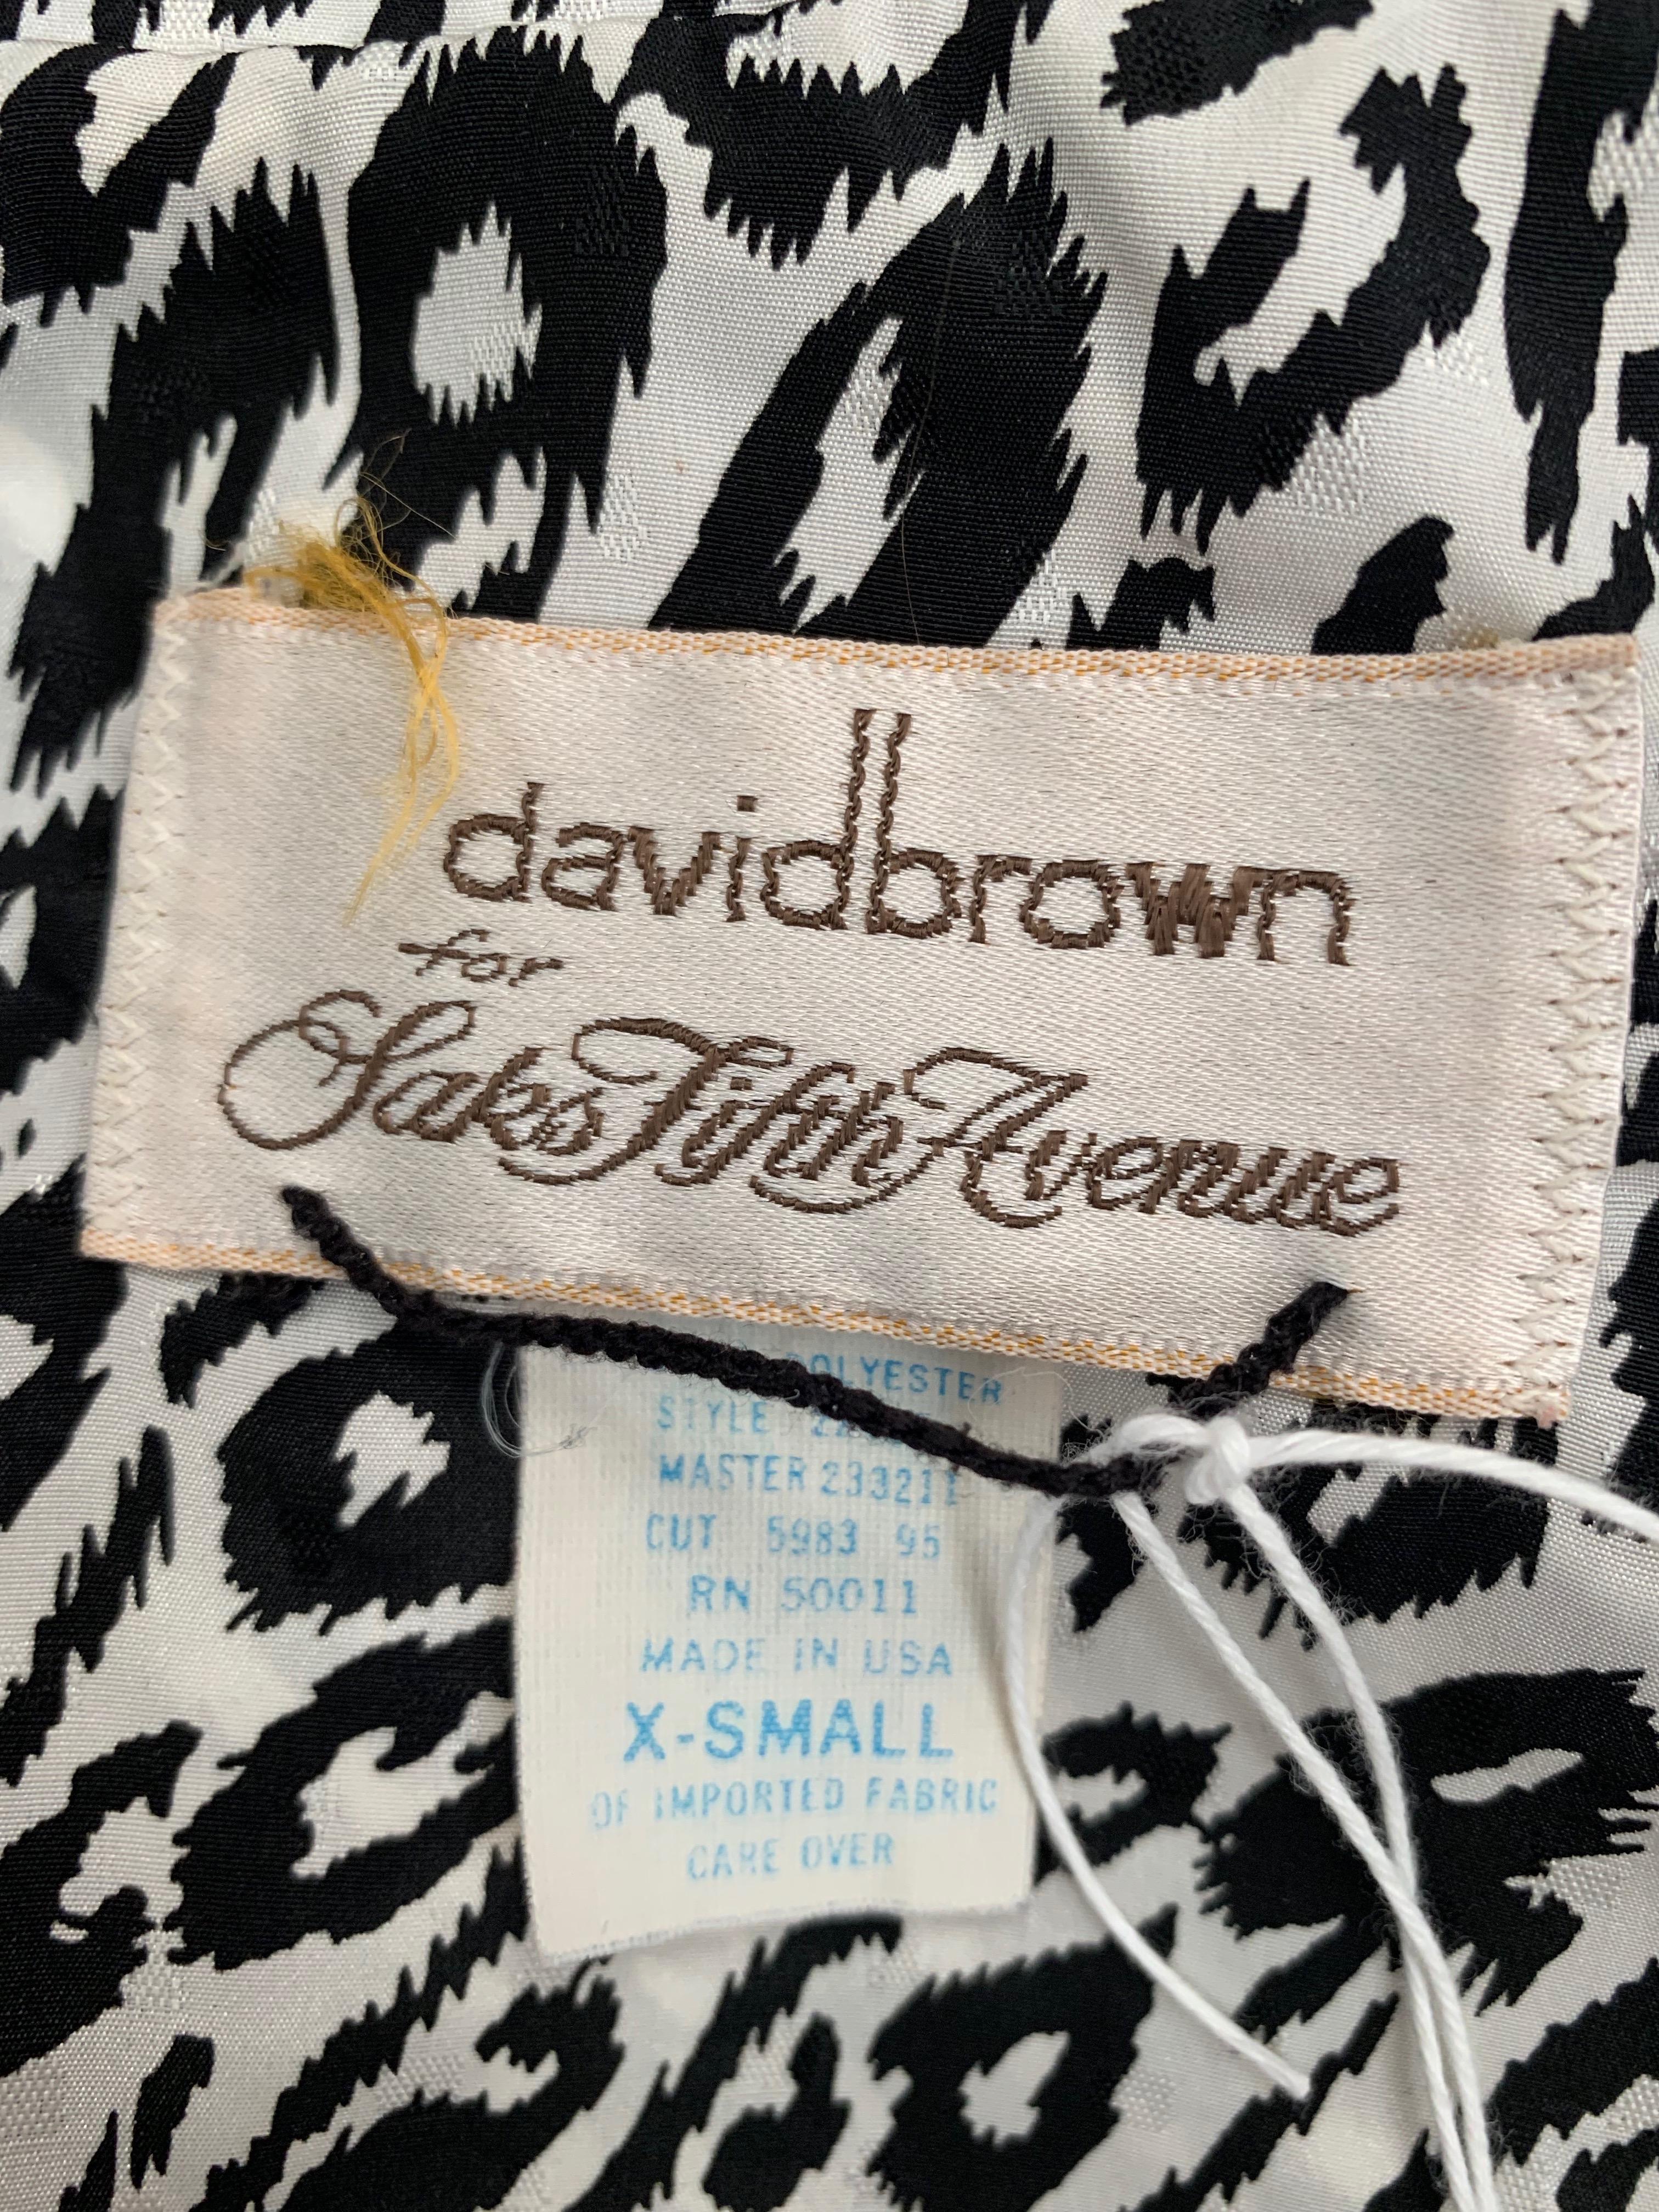 David Brown for Saks Fifth Avenue 1980s Caftan Loungewear Size Fits All. 15